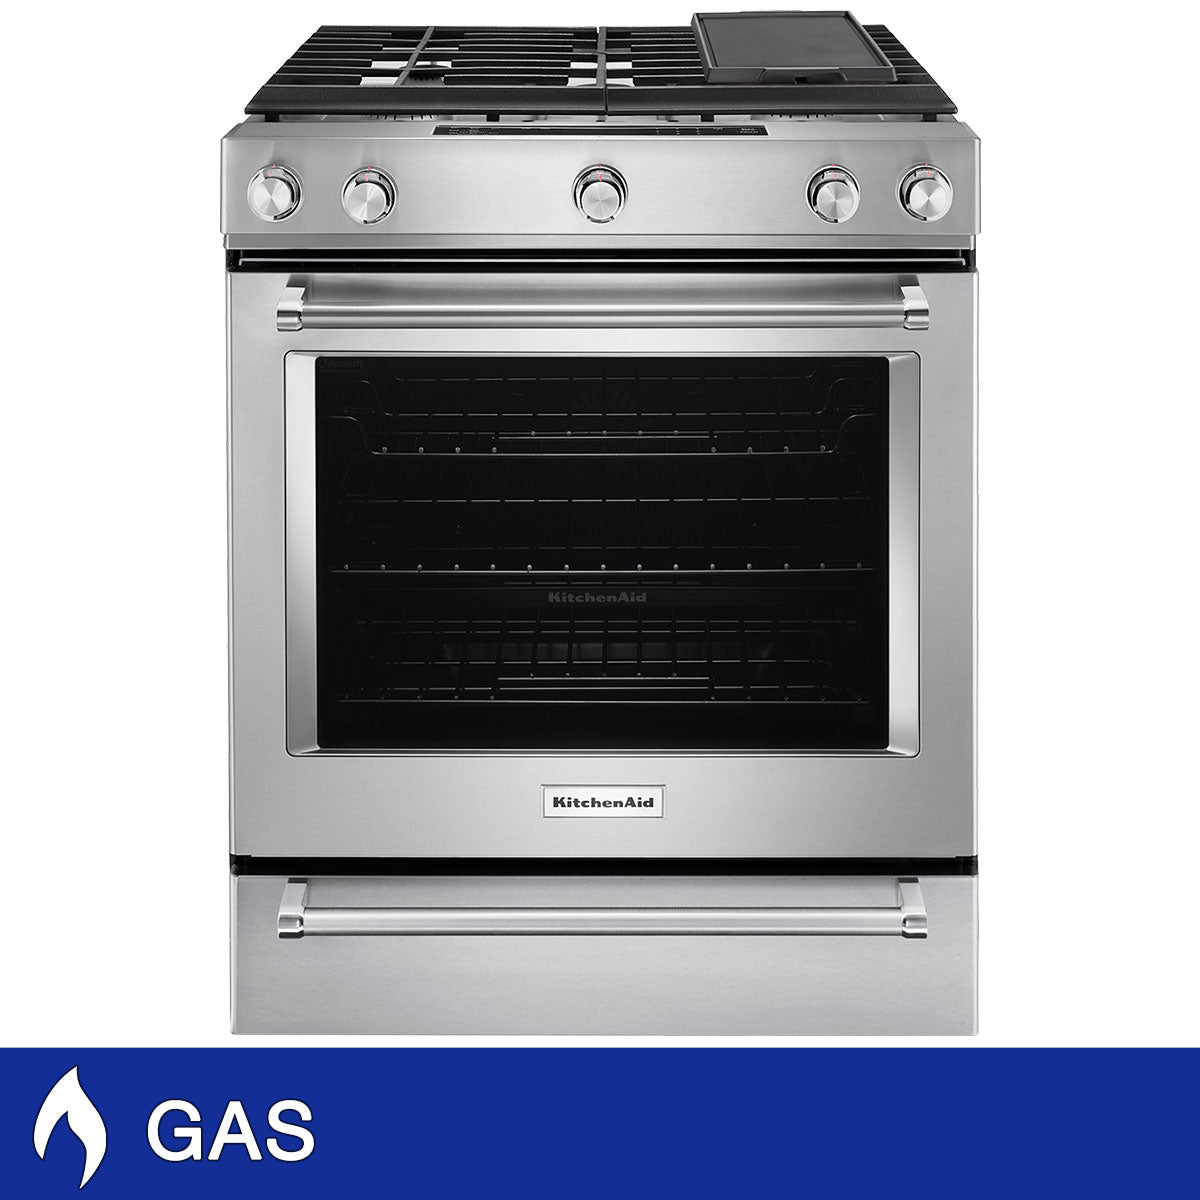 KitchenAid 6.5 cu. ft. Slide-In GAS Convection Range with Baking Drawer, Steam Rack in Stainless Steel Image